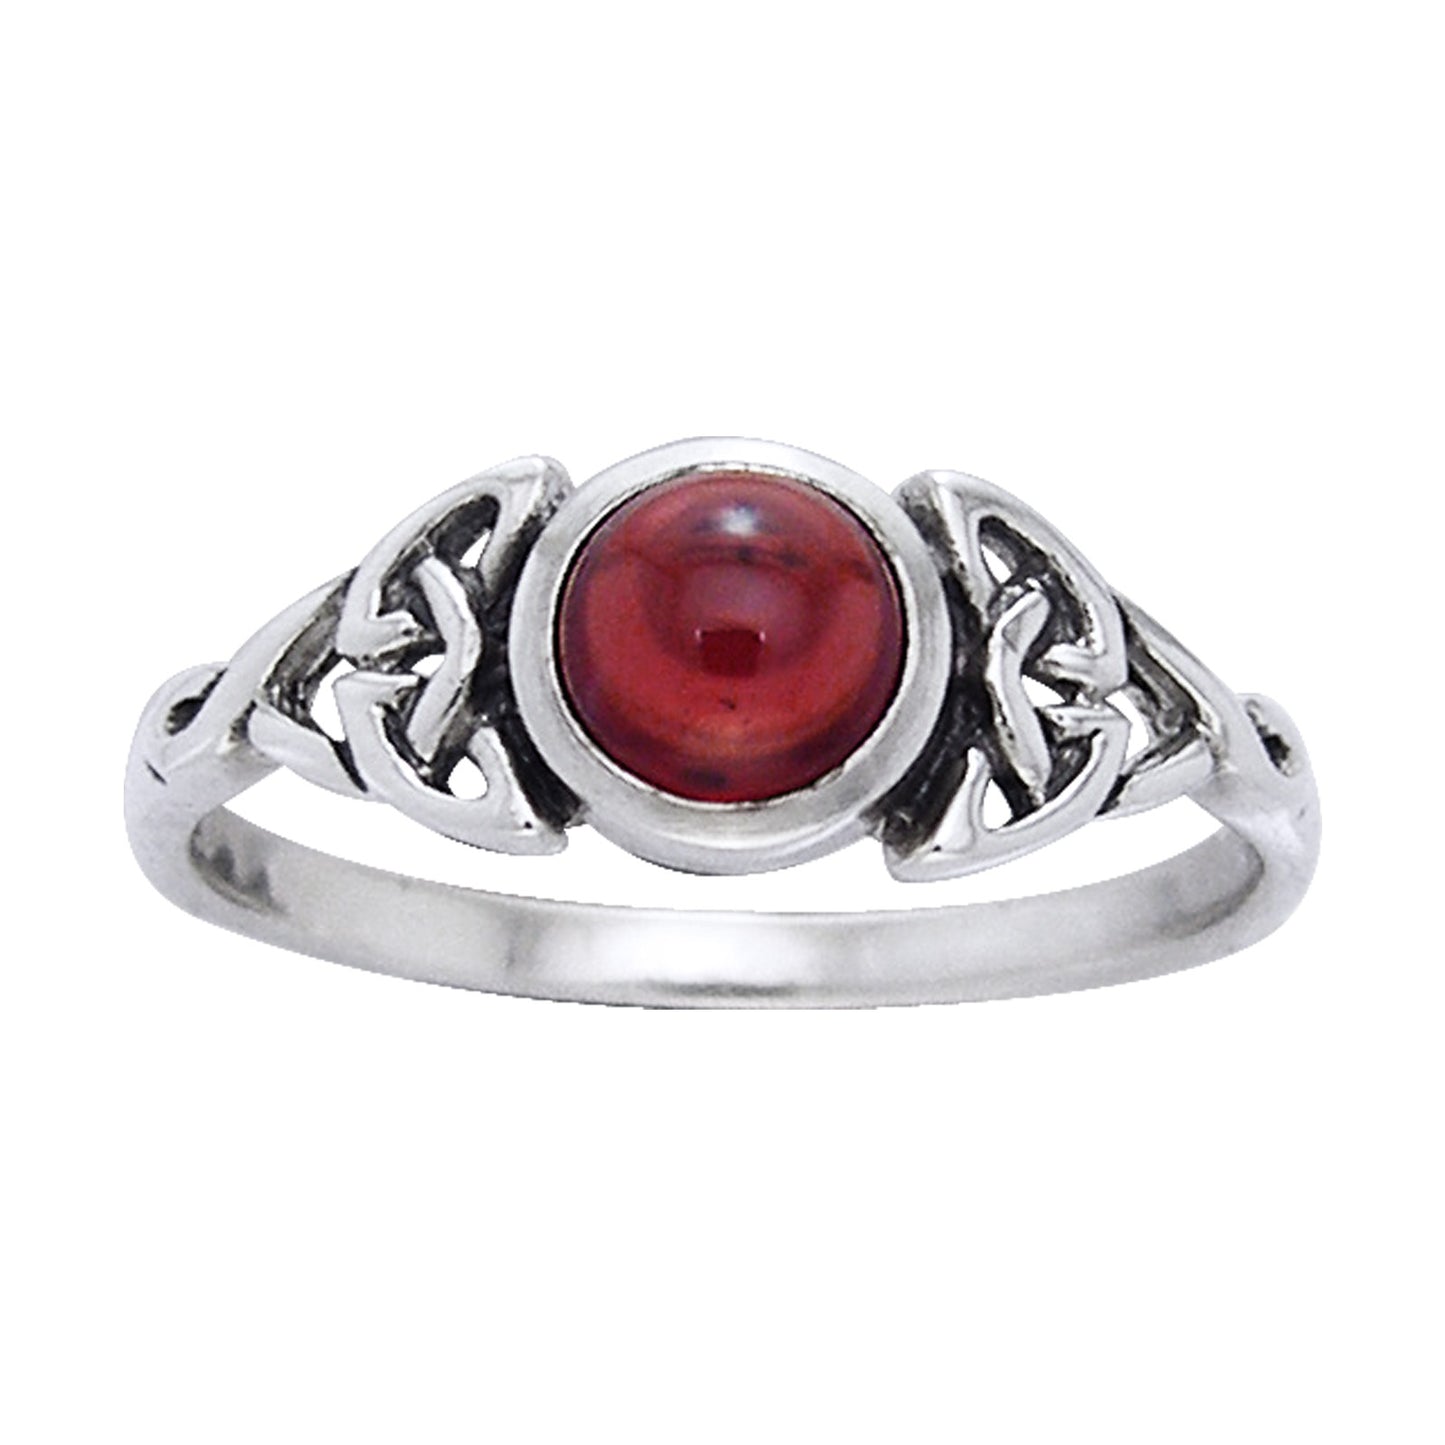 Genuine Garnet Celtic Knot Ring with Round Gemstone Sterling Silver - Silver Insanity